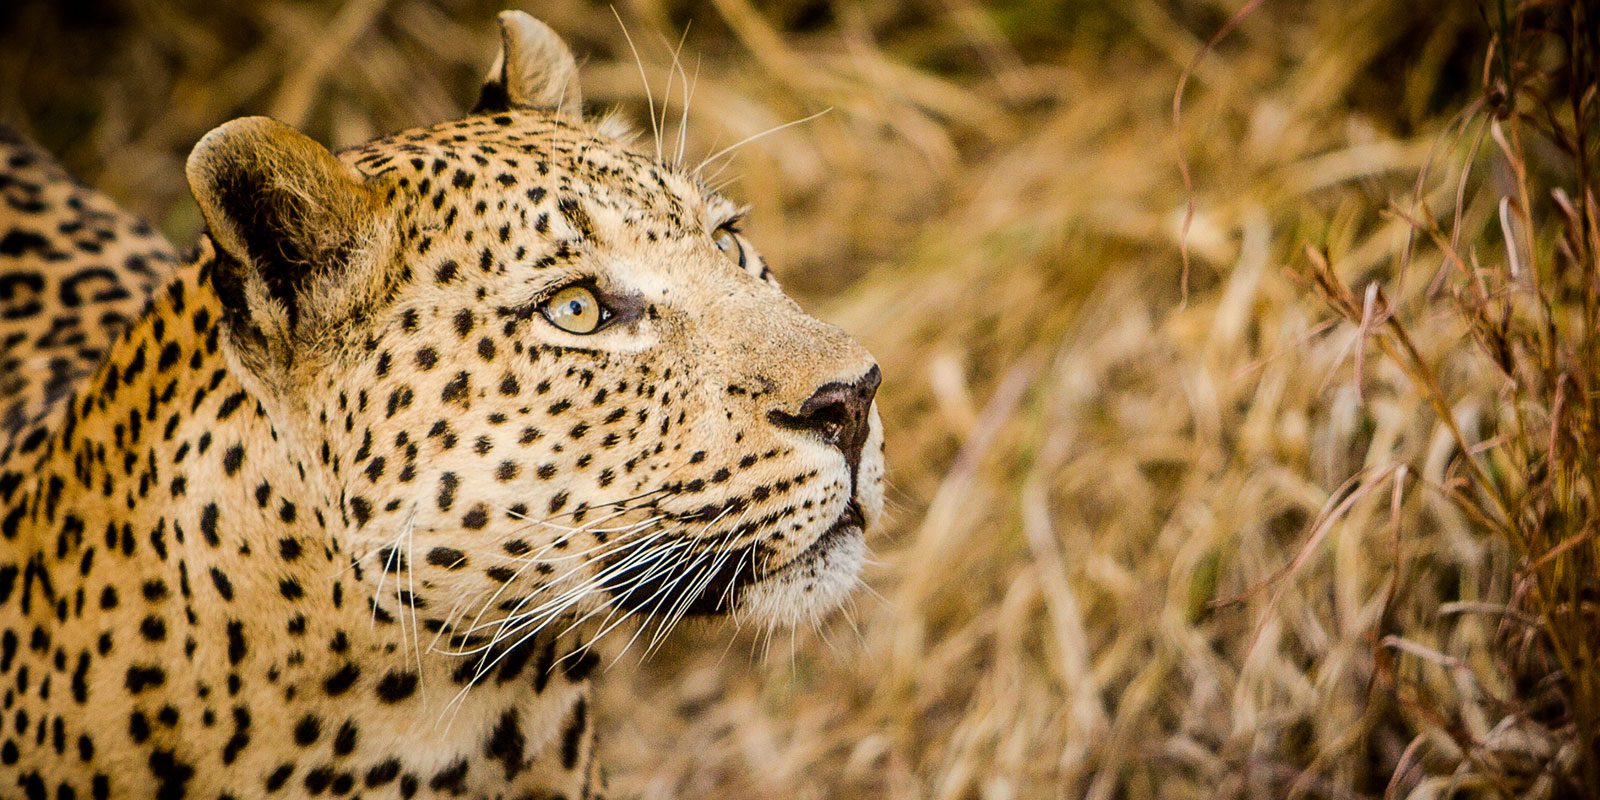 leopard at close range disguised by dry grass